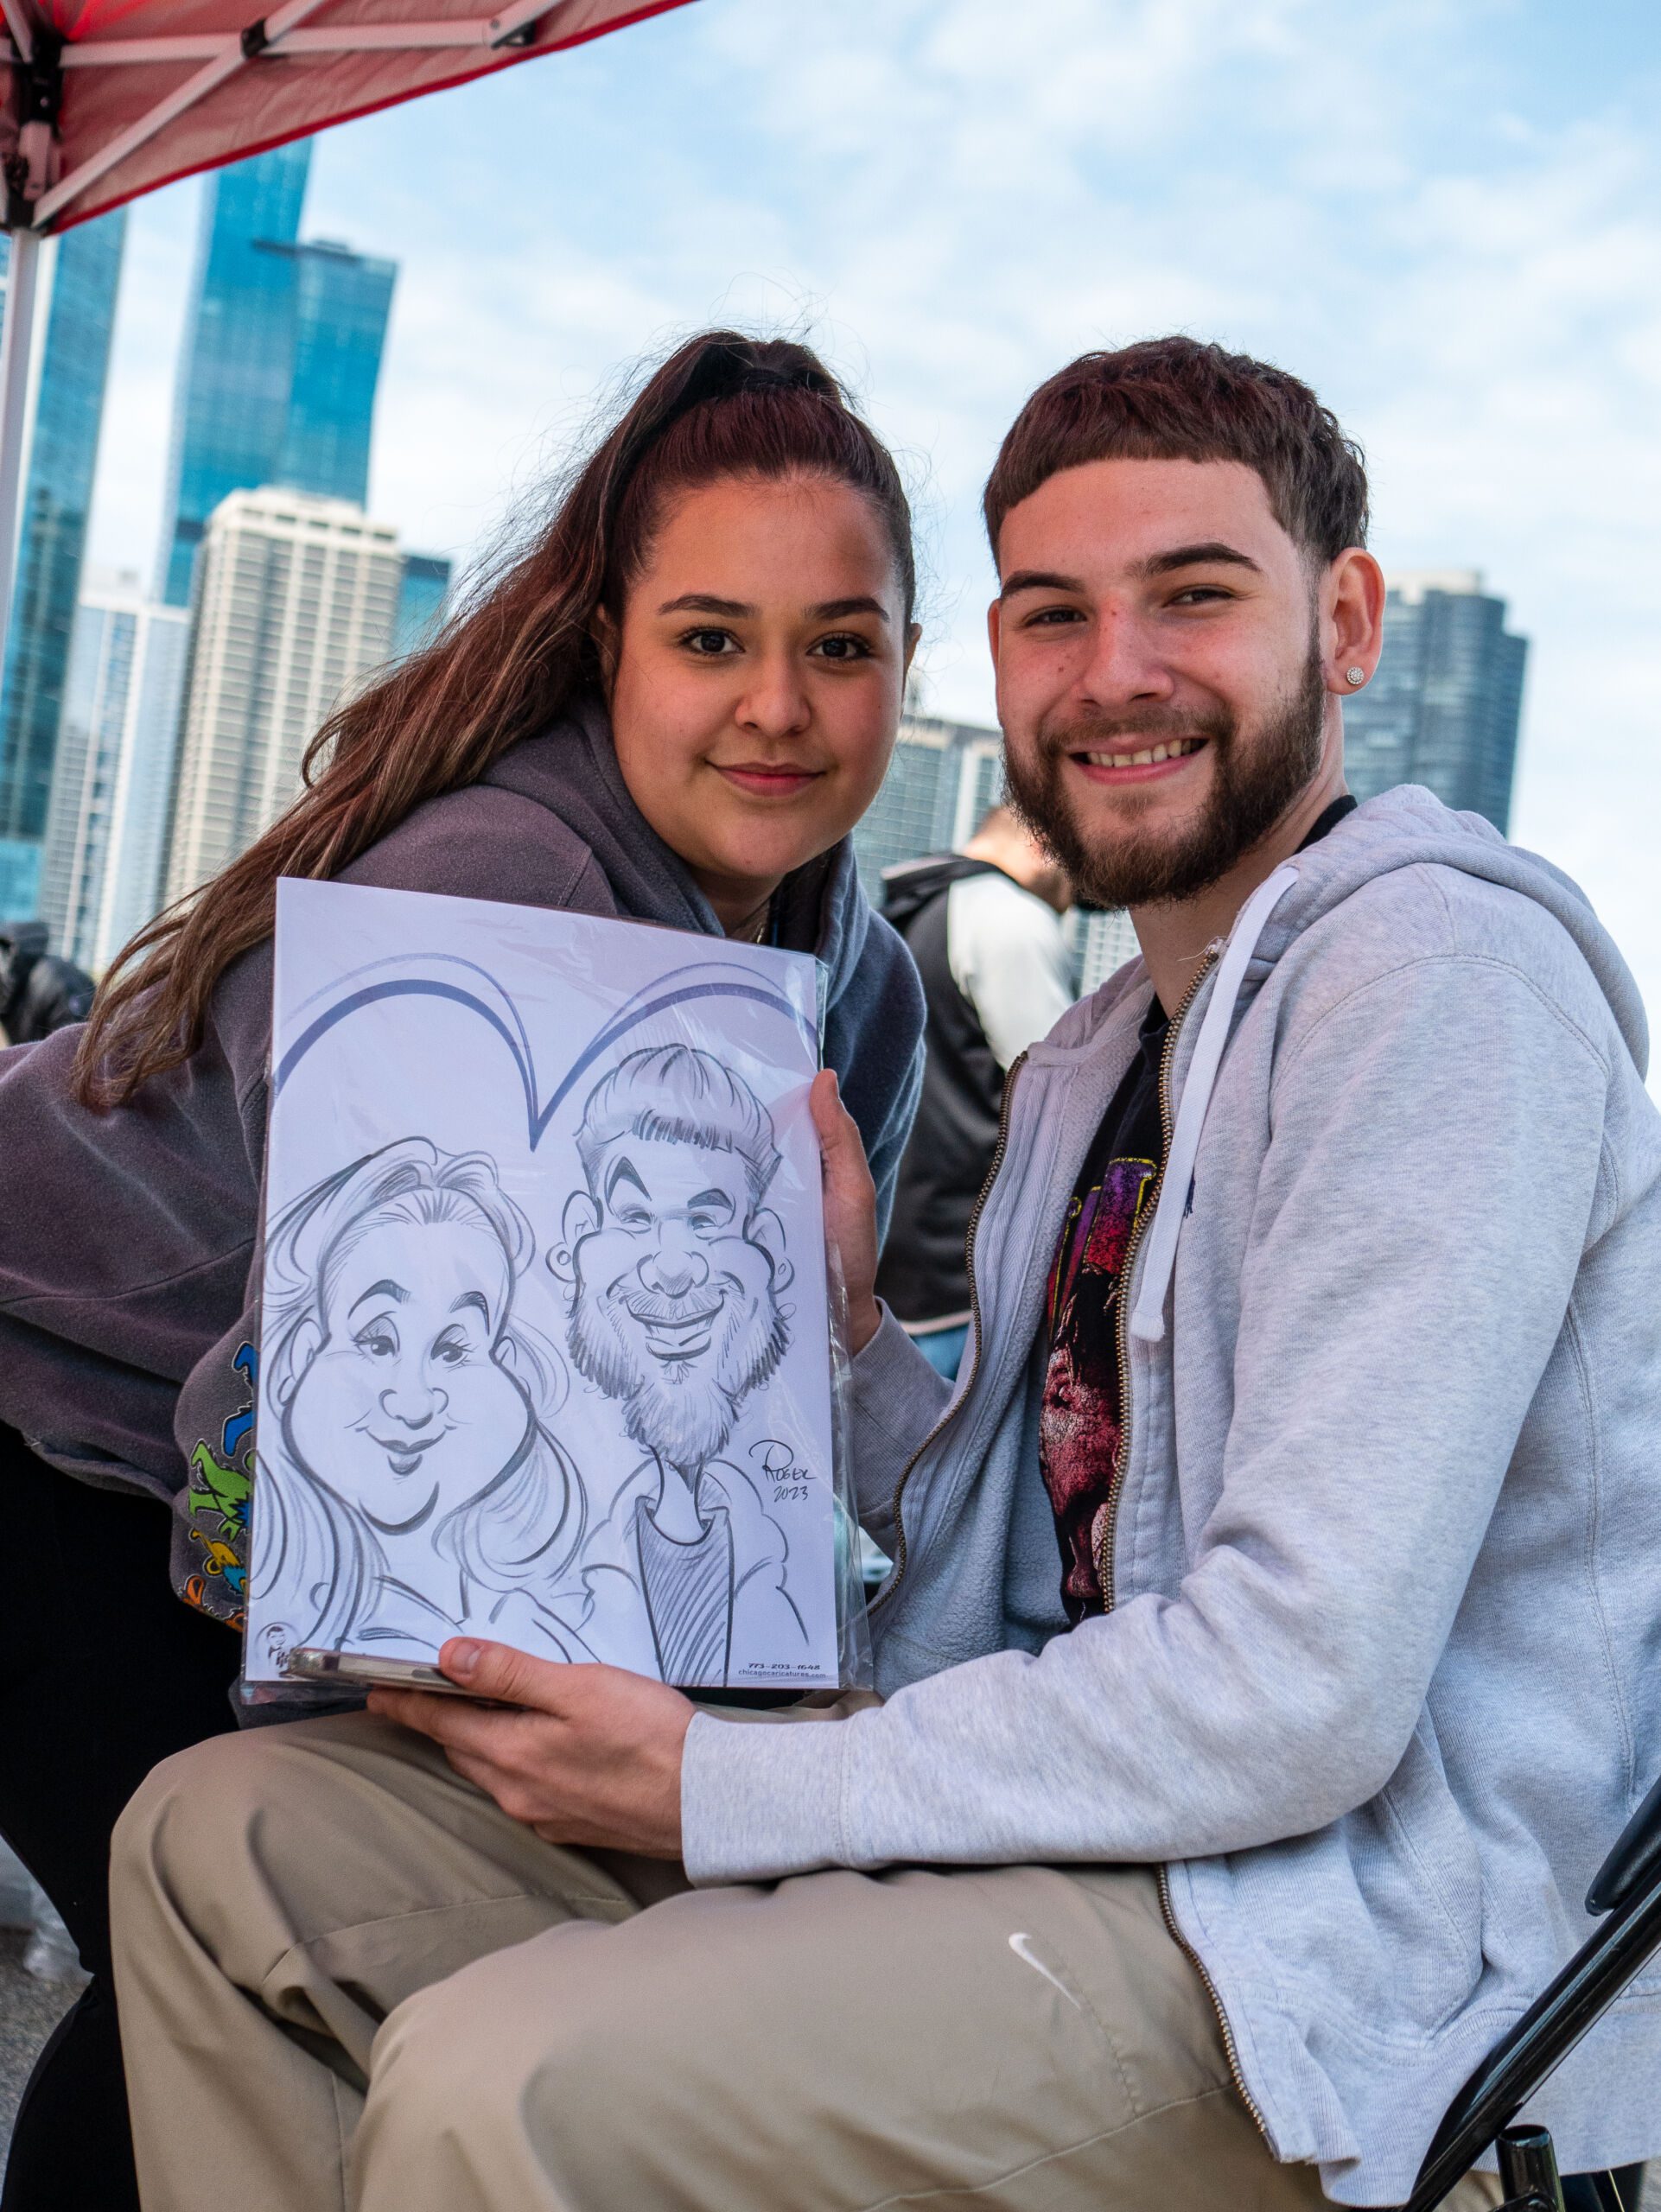 Two people pose as they show off their drawing. The two received a drawing from a carnival vendor. The person on the left has her hair up on a ponytail and the person on the right is wearing a gray sweater. He is sitting down on a chair.